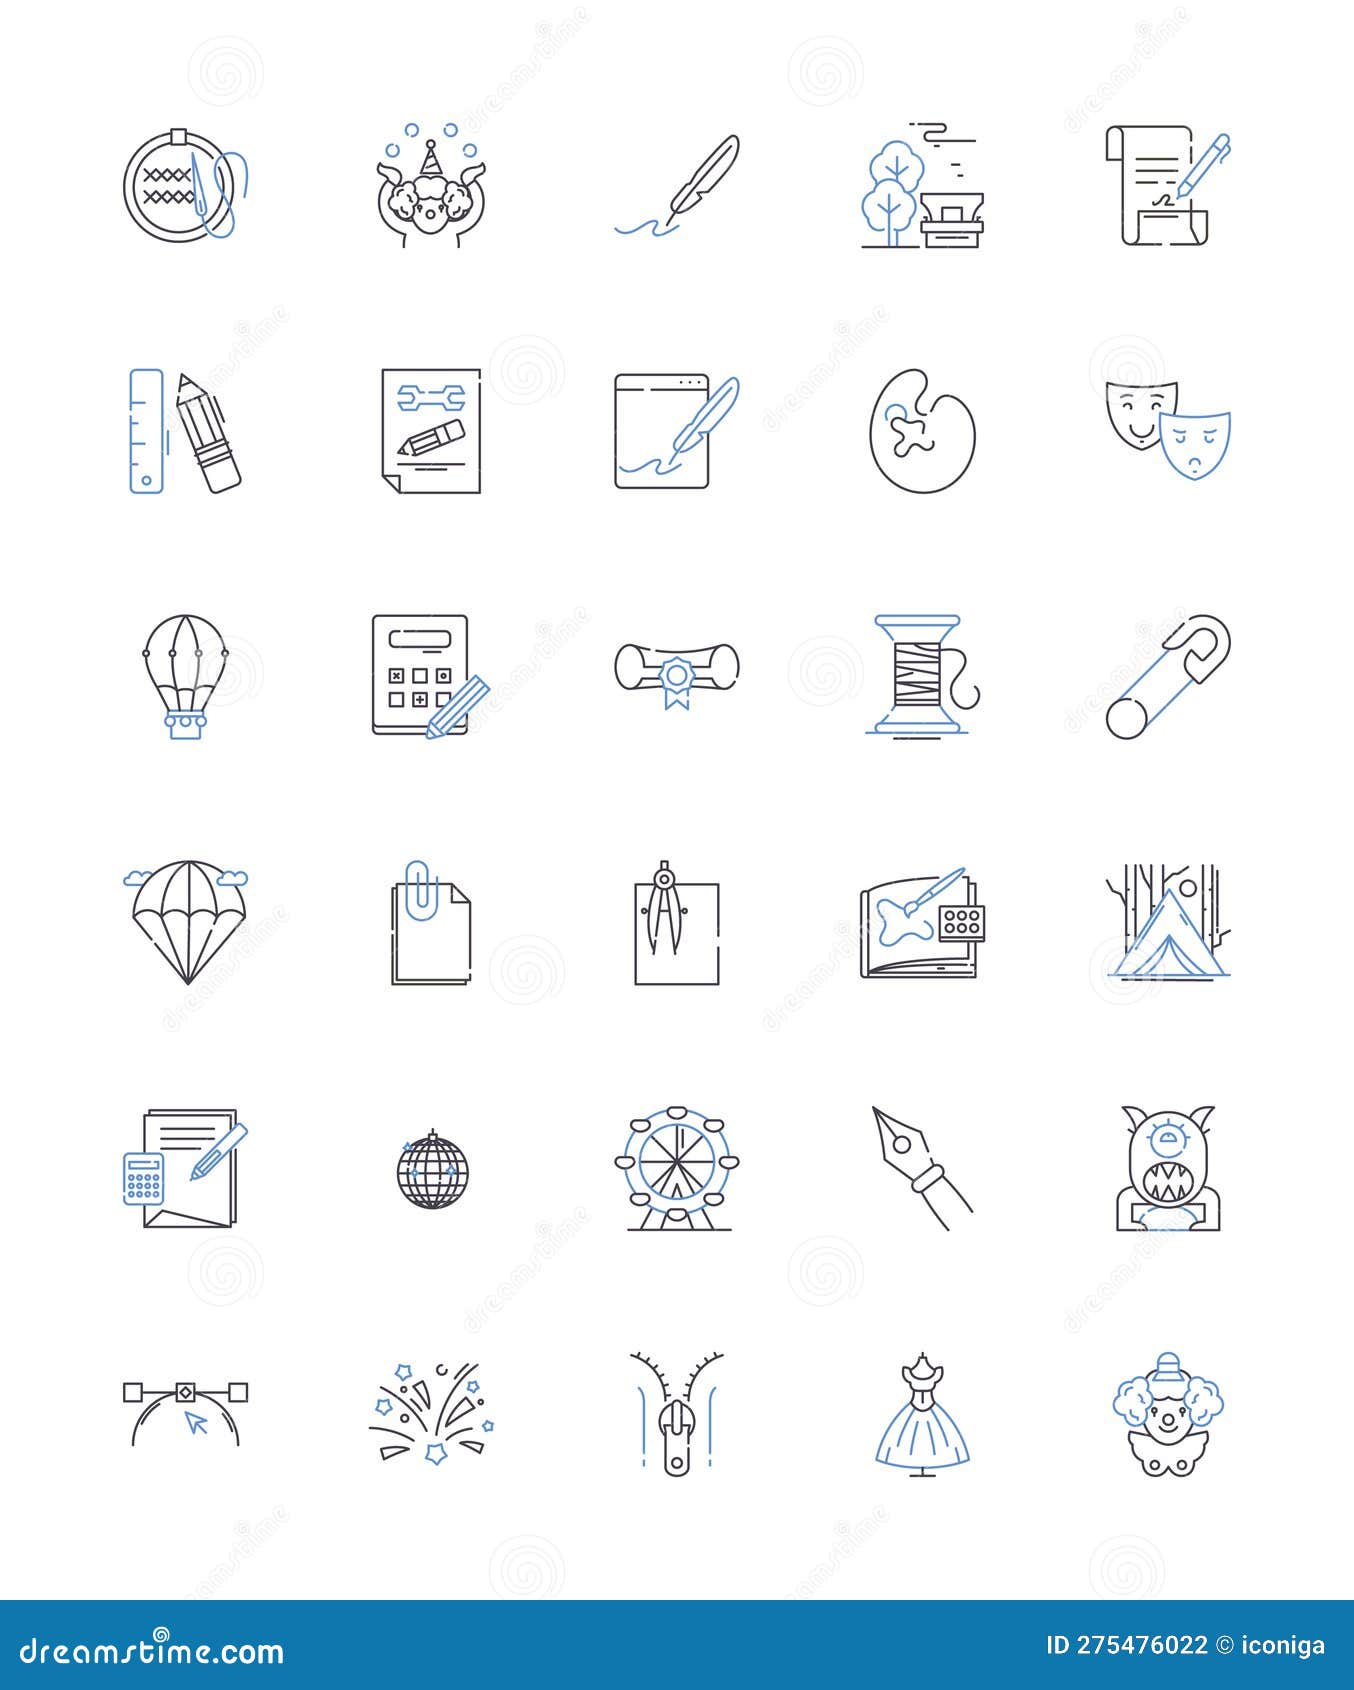 auditory arts line icons collection. soundscapes, music, sonic, aural, audiovisual, noise, sensory  and linear